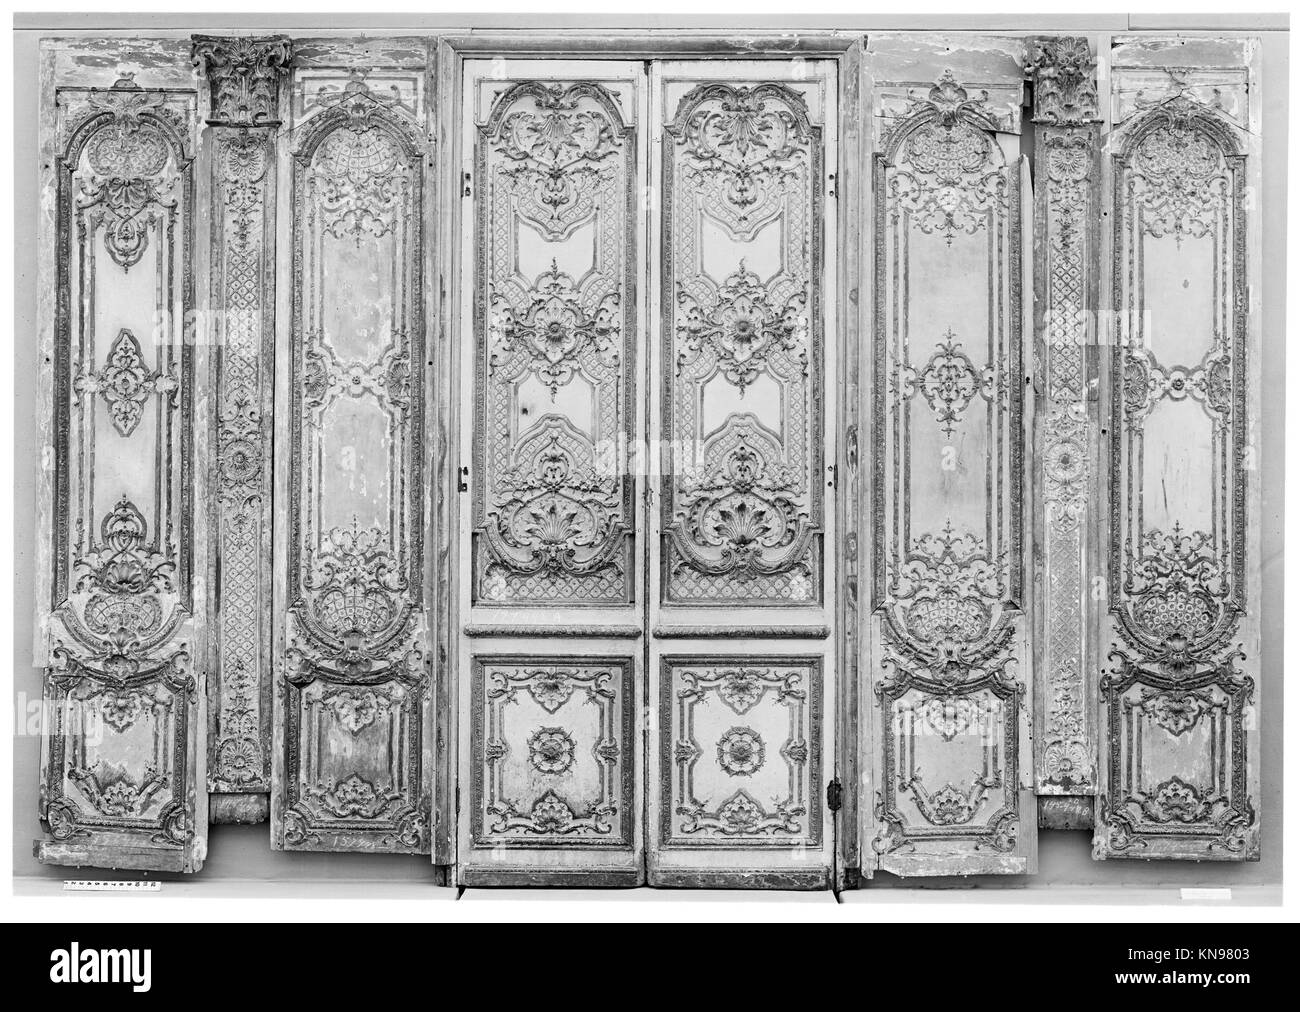 Double door- four panels, two pilasters, three gilt moldings for the door frame MET 4422 Double door- four panels, two pilasters, three gilt moldings for the door frame MET 4422 /189702 French, Double door: four panels, two pilasters, three gilt moldings for the door frame, ca. 1715, Carved, painted and gilded oak, a,b -  doors with their trim i,j,k: 106-1/4 x 53-1/2 in. (269.9 x 135.9 cm) c,e,f,h -  panels:  H. from 102 to 104-3/4 in. (259.1 to 266.1 cm); W. from 20-1/2 to 22 in. (52.1 to 55.9 cm) d - pilaster:  94-1/2 x 12 in. (240 x 30.5 cm) g - pilaster: 94-1/2 x 12-1/2 in. (240 x 31.8 cm) Stock Photo